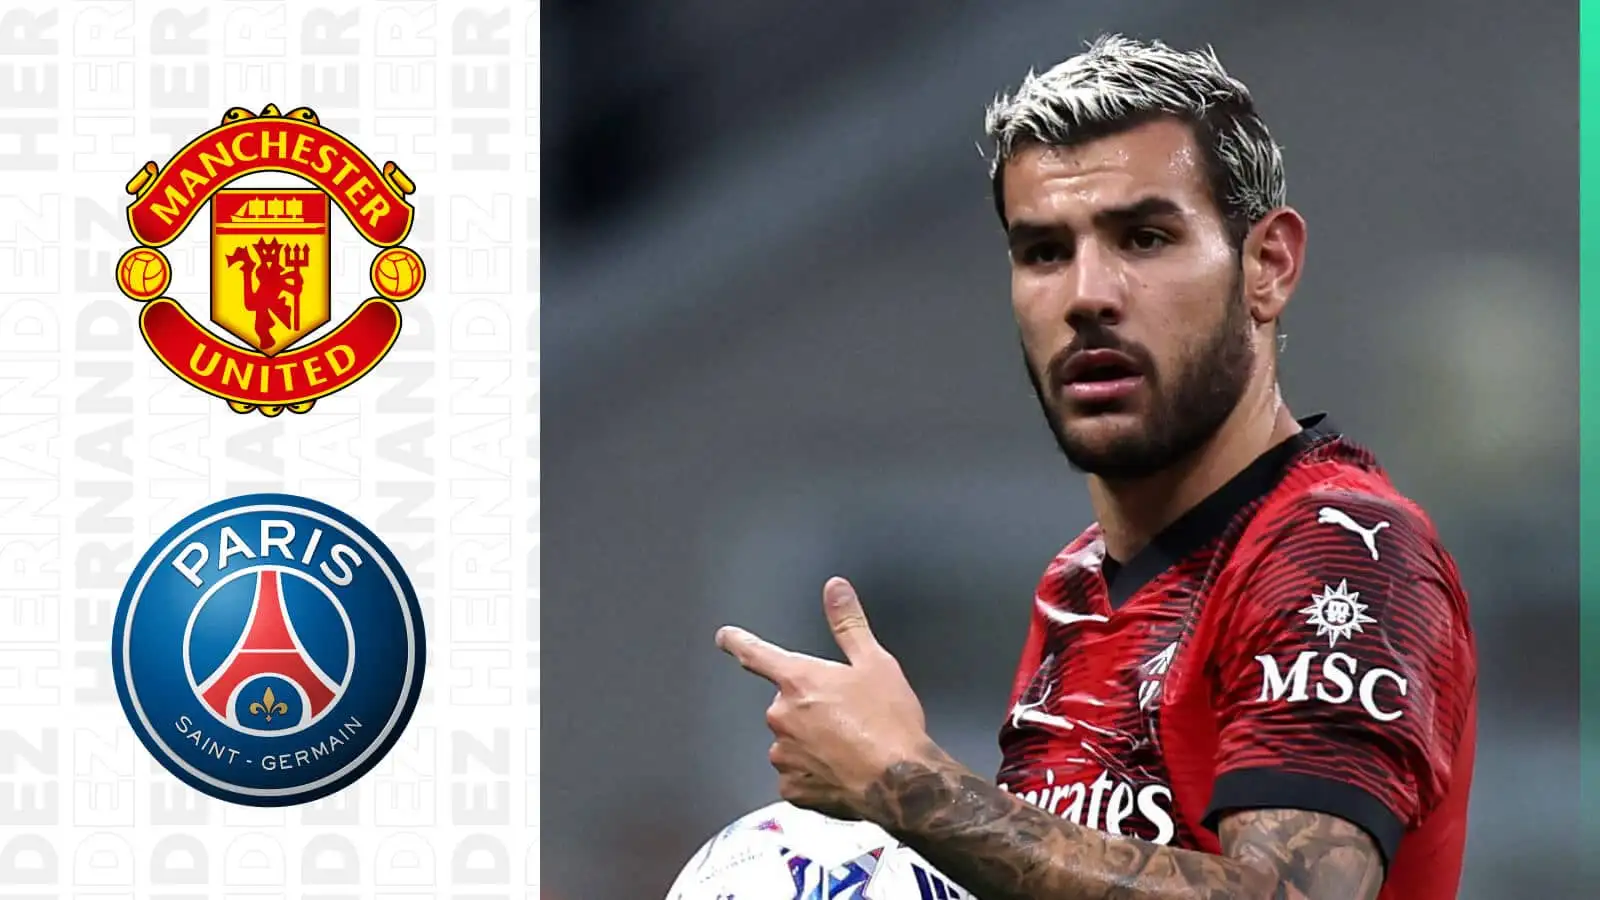 Theo Hernandez next to the Man Utd and PSG badges